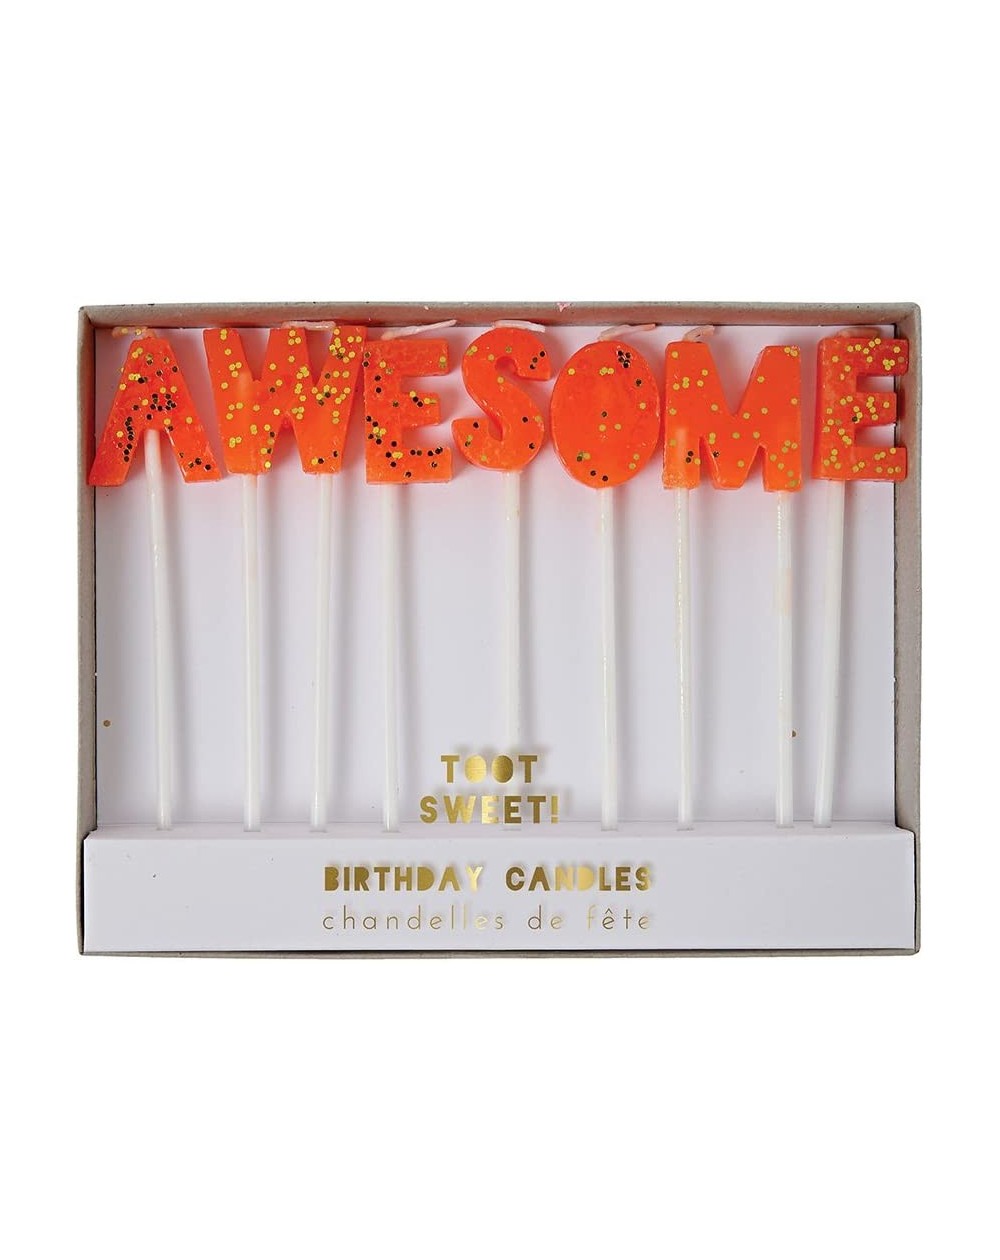 Birthday Candles Awesome Candles - CF11XIAX83B $10.01